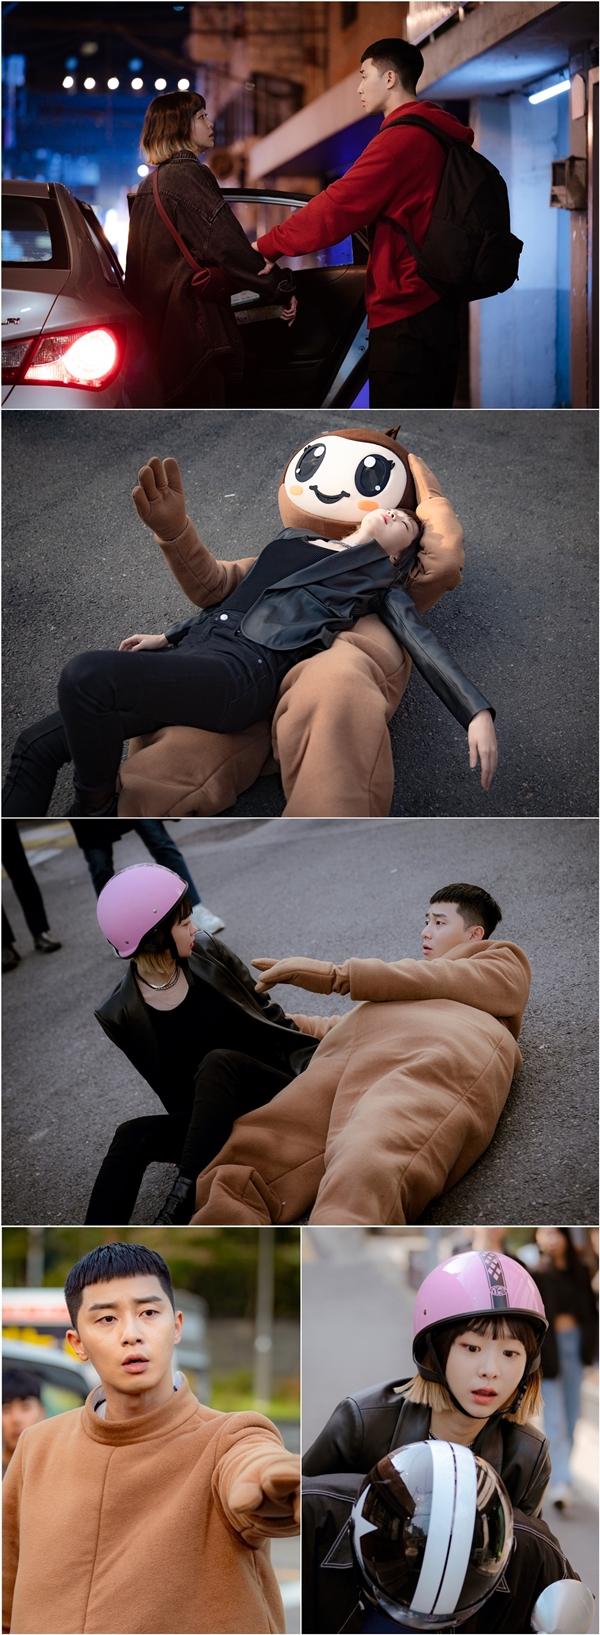 Itae One Clath Park Seo-joon and Kim Da-mi finally meet.JTBCs Golden Earth Drama Itae One Clath (playplayed by Cho Kwang-jin and directed by Kim Sung-yoon) released a still cut featuring the first meeting of Park Seo-joon and Kim Da-mi, which can not be more intense than this.Itae One Clath attracted viewers from the first broadcast, foreshadowing the hip rebellion of youths who have united in unreasonable world stubbornness and popularity.Above all, Park Seo-joons presence, which had returned to Park Seo-joon itself, was overwhelming.In the last broadcast, the death of his father led to a link between Park and Jang Dae-hee (Yoo Jae-myung), the president of Jangga, which is a terrible evil that can not be stopped.Roy, who was released from prison with a boiling heart in the word revenge, revealed his dream of setting up a small shop in Itae One.Seven years later, Roy, who entered Itae One to achieve his dream, reunited with Oh Sua (Kwon Nara), amplifying his expectations.Meanwhile, another person who will change the fate of Roy, IQ162, the genius Sosio Pass Joy, is about to make a full-scale start.The photo shows the first meeting between Roy and Joy, and Joy, who is about to get into a taxi, and Roy, who snatched his wrist, foresaw an unusual first meeting.The appearance of Joy, who stimulated the just Xiao Xinnam Park, is already expected.Another photo released together attracts attention from two people who have been reunited on the streets of Itae, and Joy, who is divided into two bodies as if he passed out over a person wearing a doll mask, attracts attention.The main character in the doll is Roy, Xiao Xin, and the extraordinary personality of the influencer Joy, who adds to the expectation of what synergy they will receive.Especially, Kim Da-mi, who made a topic by decorating the first scene of Drama, is focused on his performance.On the 7th broadcast, Itae Ones Sweet Night poacher, which is filled with blood and sweat of Roy, finally opens.Here, the meeting between Joy Seo and Jang Geun-soo (Kim Dong-hee), the second son of Janga, brings a stir to Sanbam.The production team said, The first meeting between Roy and Joy is exciting from the beginning.I will be able to feel the unique charm of Joy at once, he said. Please watch the beginning of the hot Rebellion, the entry of the blue-colored one of the roys.